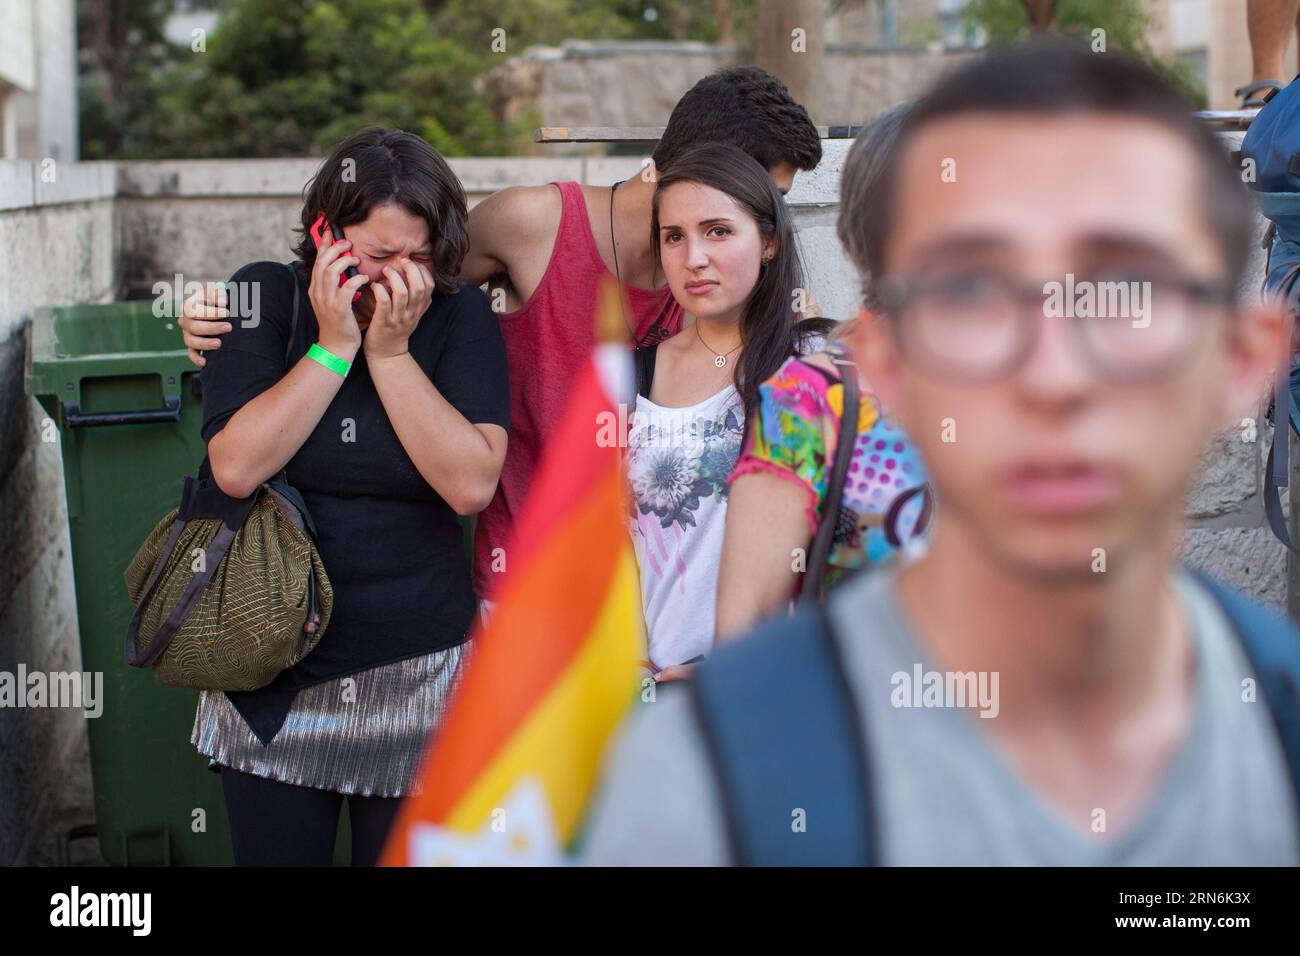 (150730) -- JERUSALEM, July 30, 2015 -- A woman cries while making a phone call after a stabbing attack during the annual gay pride parade in Jerusalem, on July 30, 2015. Six people were stabbed at Jerusalem s annual gay pride parade on Thursday, in one of the gravest attacks on the gay community in Israel, Israeli officials and eyewitnesses told Xinhua. A police spokesperson said the assailant was captured and identified as Yishai Schlissel, a Jewish ultra-Orthodox man who carried out a similar attack in 2005, injuring three people. Schlissel was released from prison only three weeks ago. /Em Stock Photo